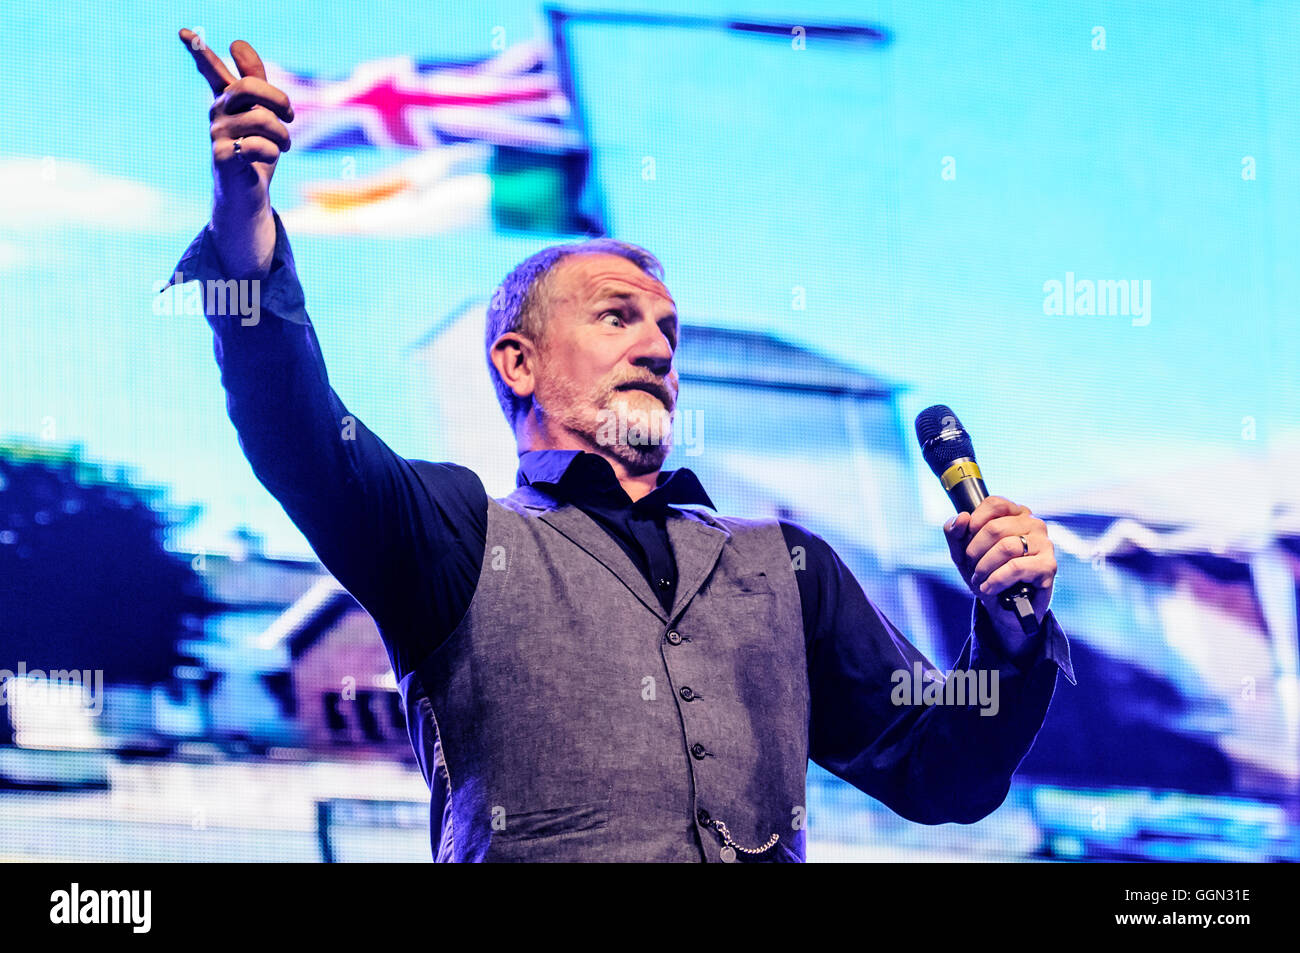 Belfast, Northern Ireland. 05 Aug 2016 - Belfast comedian Jake O'Kane performs at the annual Feile an Phobail comedy night. Credit:  Stephen Barnes/Alamy Live News Stock Photo